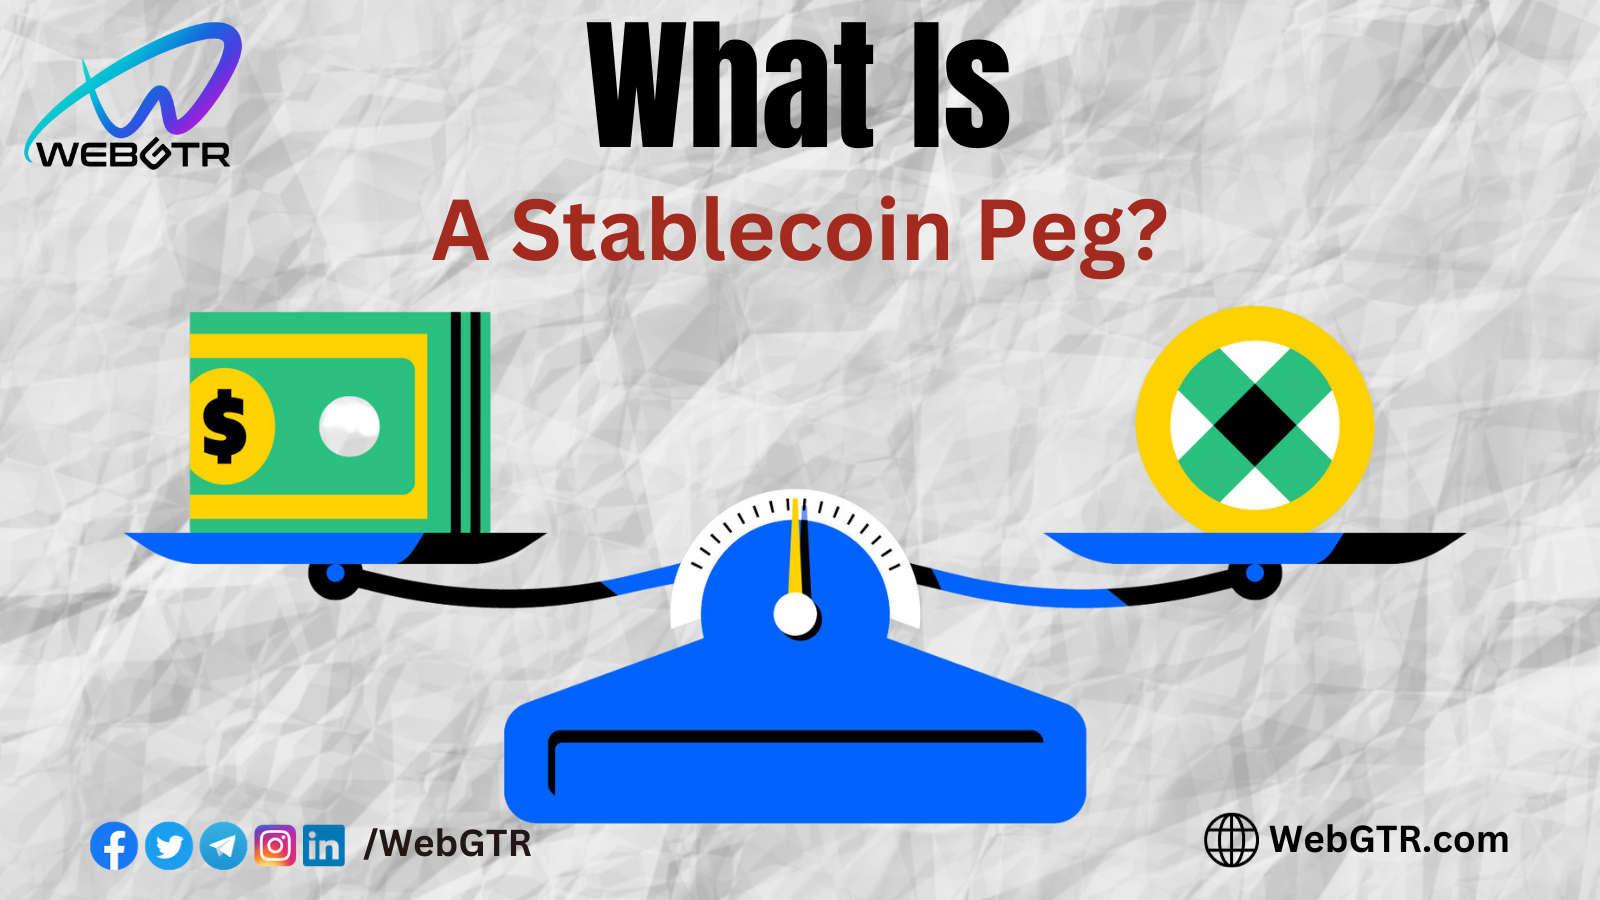 What Is a Stablecoin Peg?